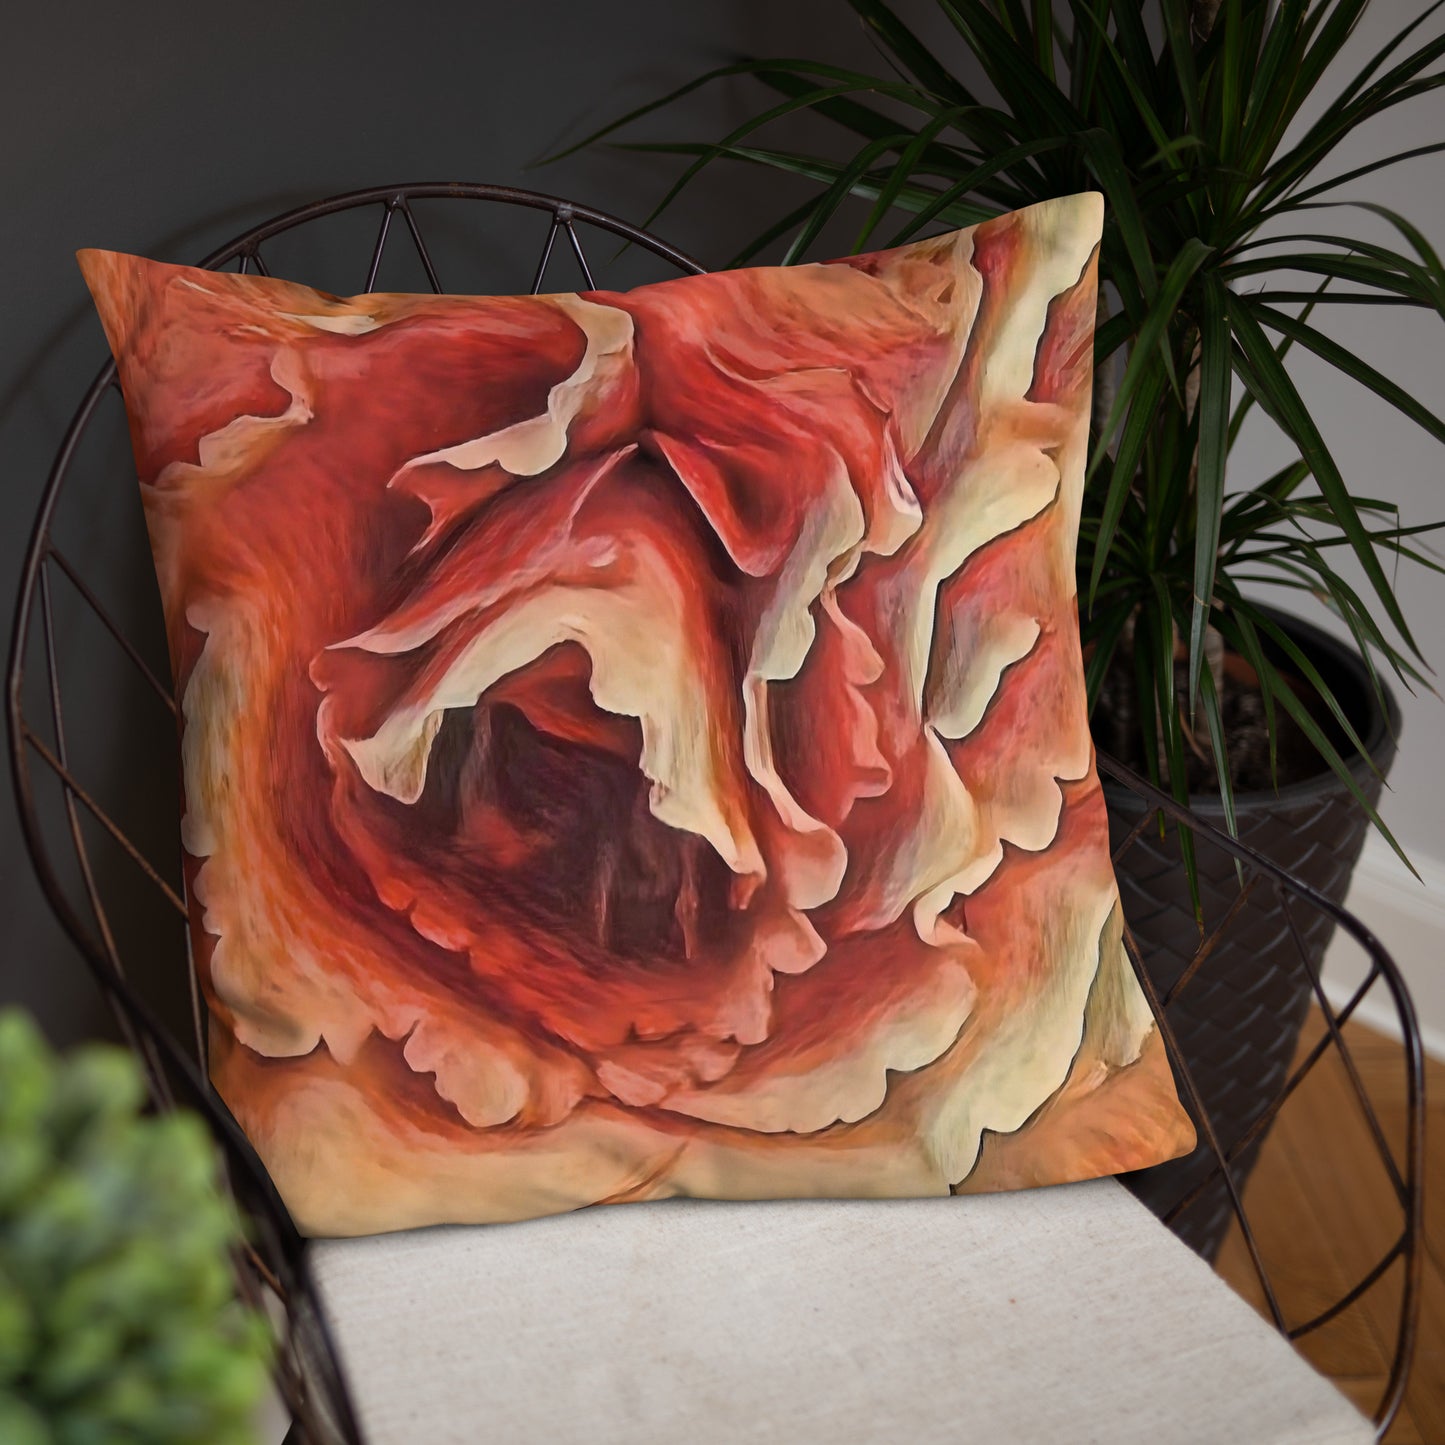 Apricot Begonia Accent Pillow-FREE SHIPPING